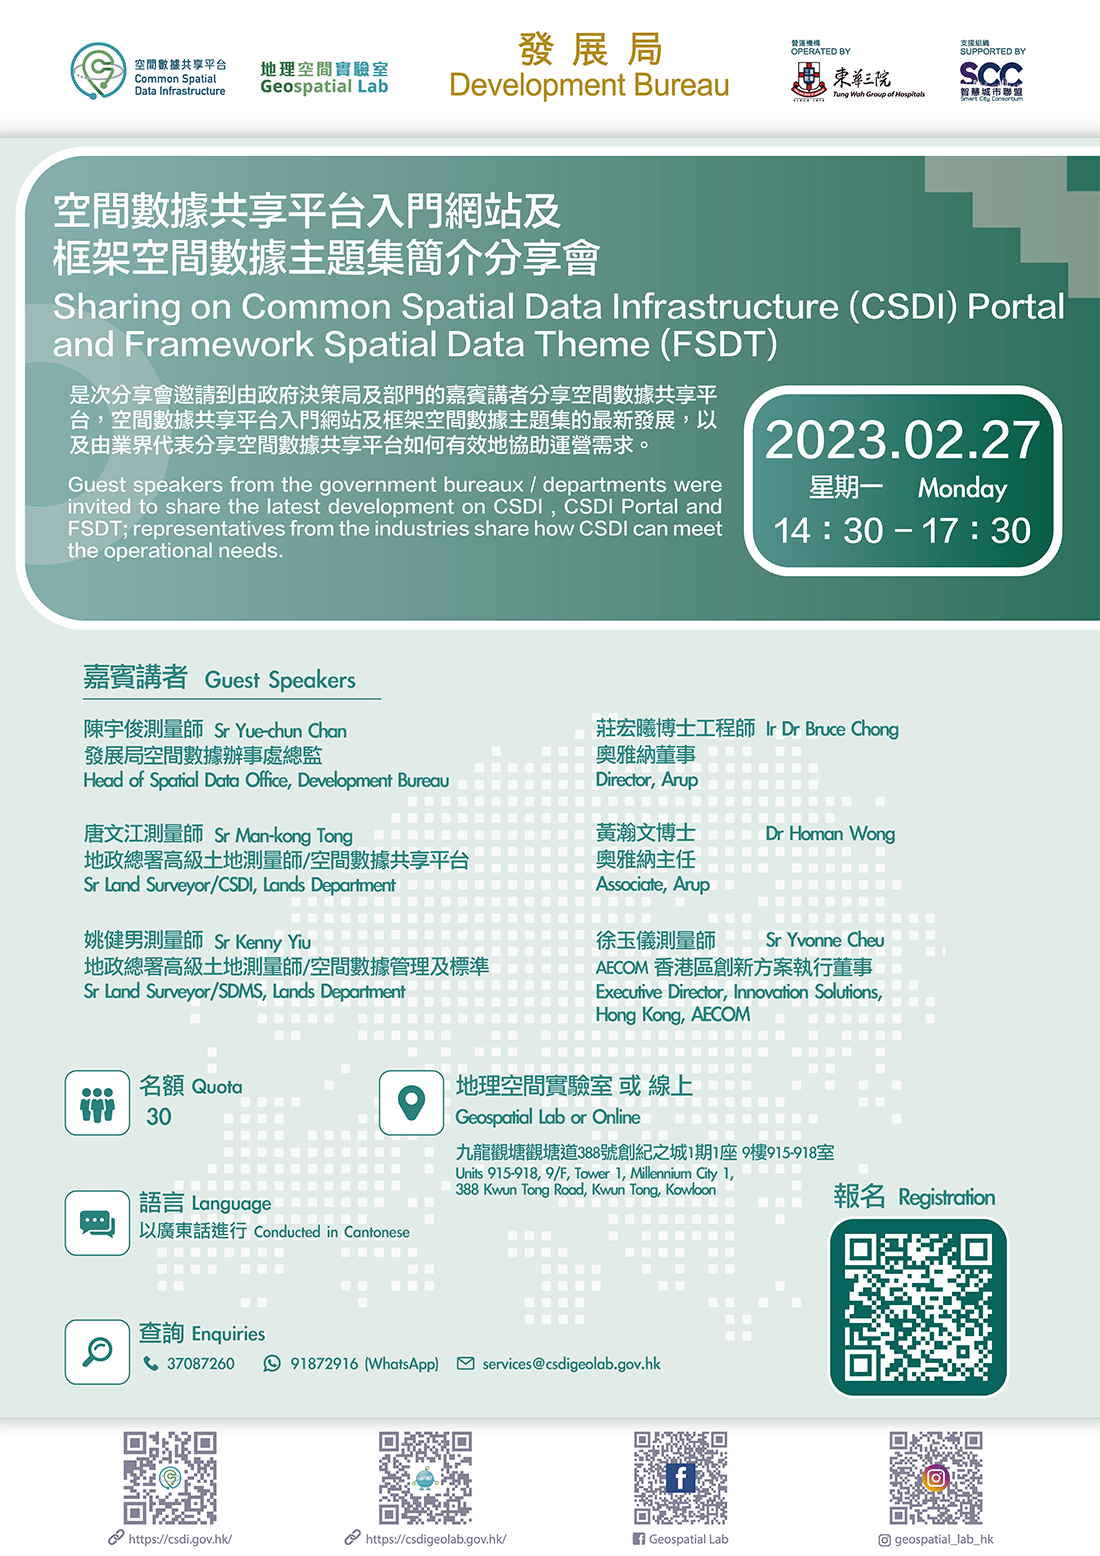 Sharing on Common Spatial Data Infrastructure (CSDI) Portal and Framework Spatial Data Theme (FSDT)